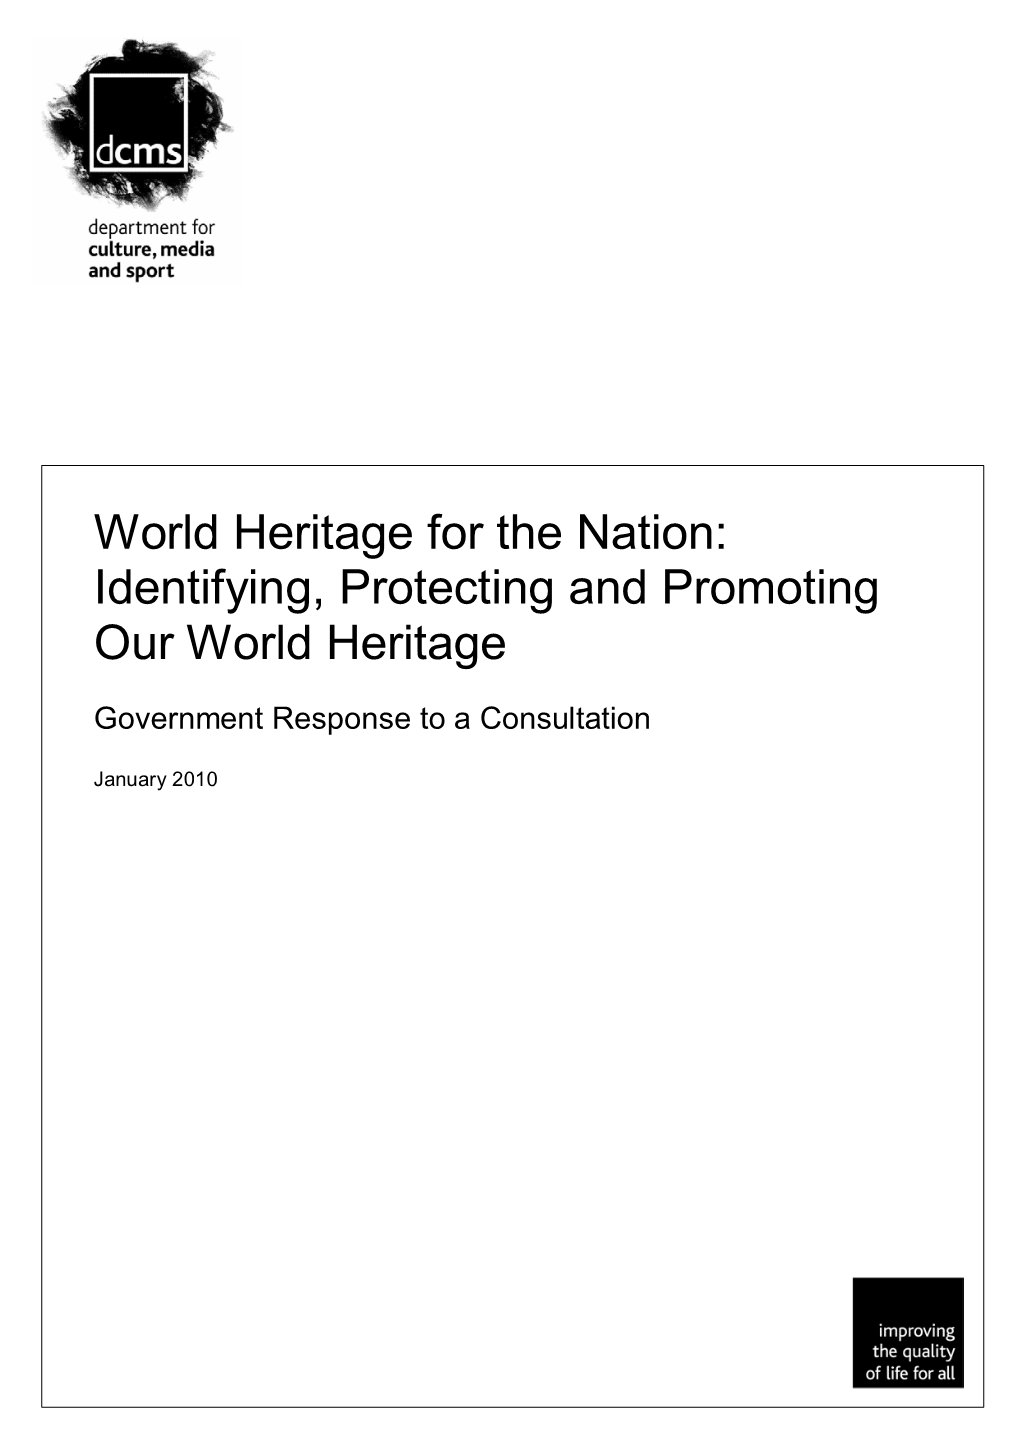 Identifying, Protecting and Promoting Our World Heritage. the Government's Response To